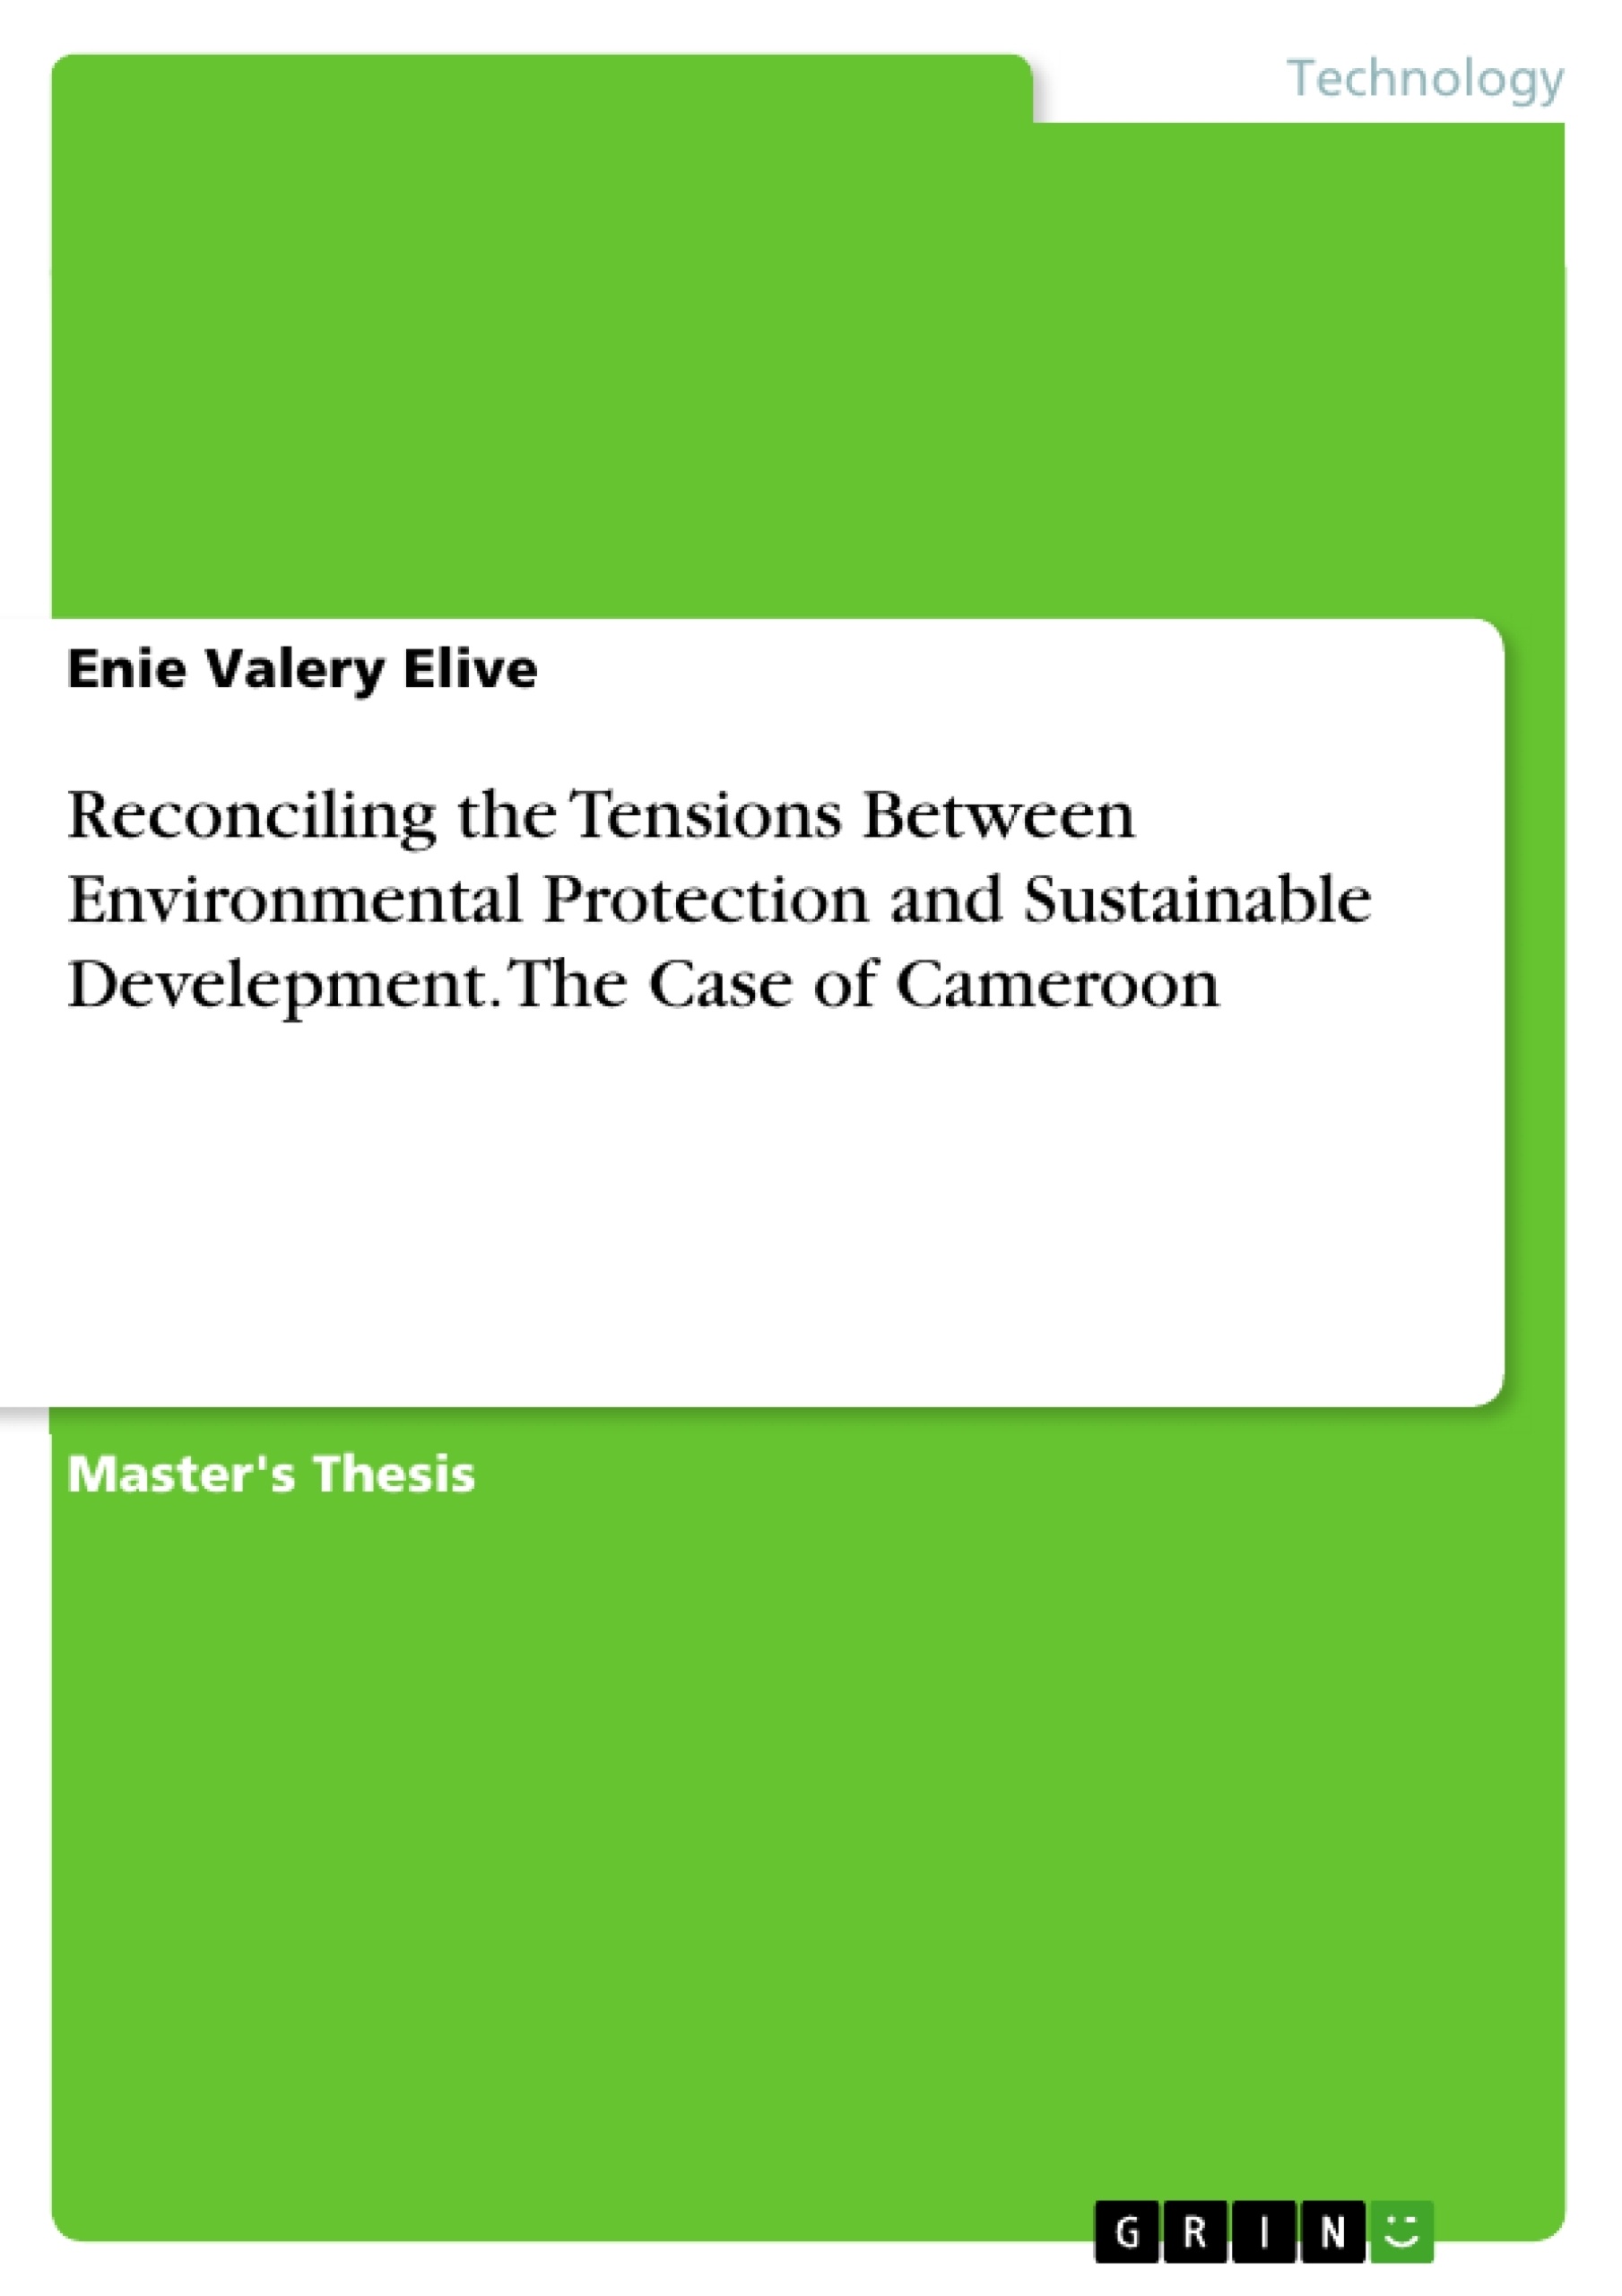 Title: Reconciling the Tensions Between Environmental Protection and Sustainable Develepment. The Case of Cameroon